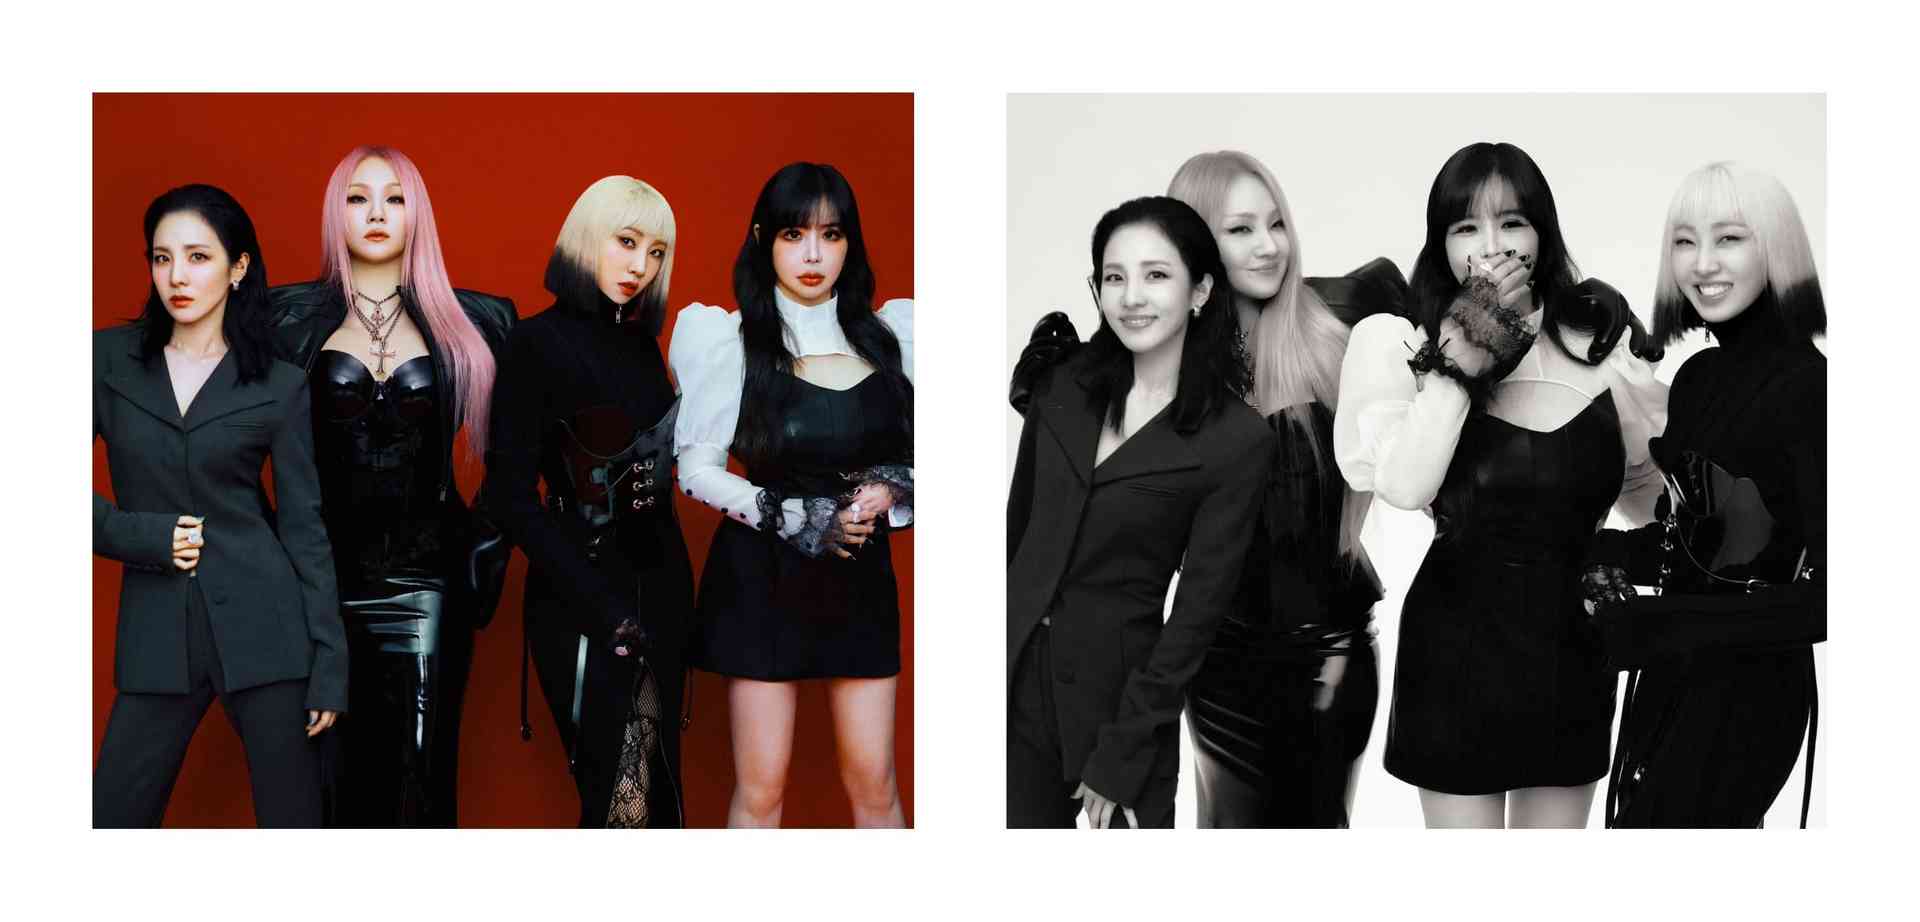 LOOK: 2NE1 reunites for chic photoshoot for 15th debut anniversary